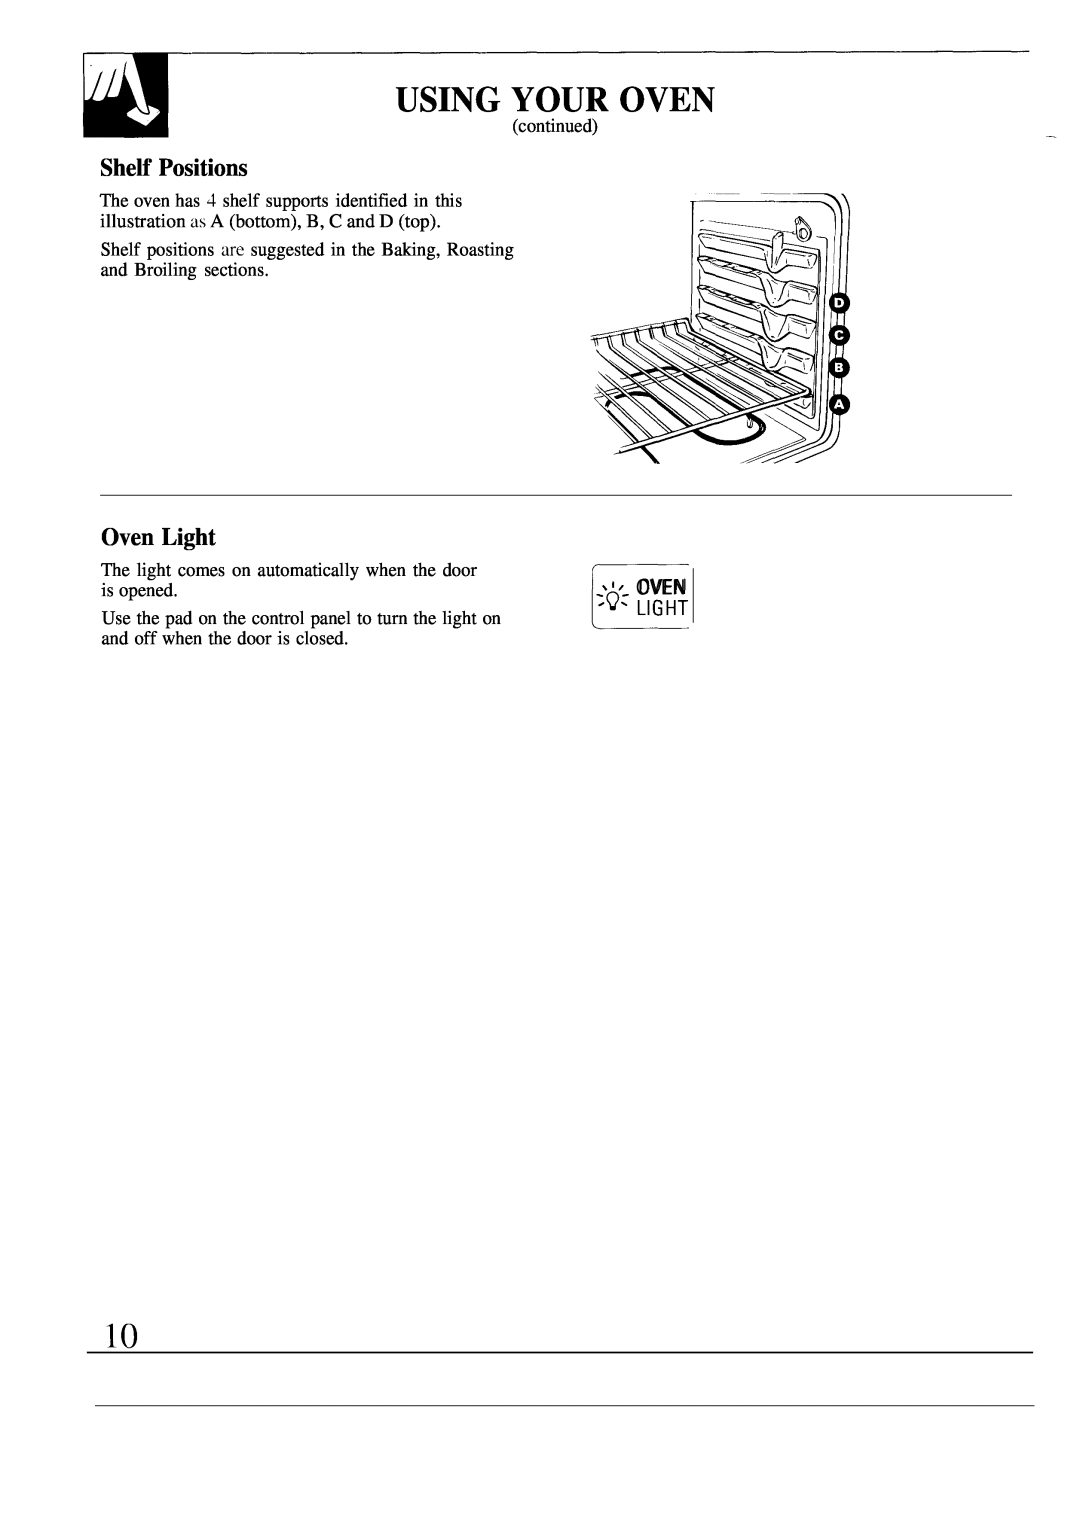 GE JKP17, MNU099 warranty Shelf Positions, Oven Light, Using Your Oven 